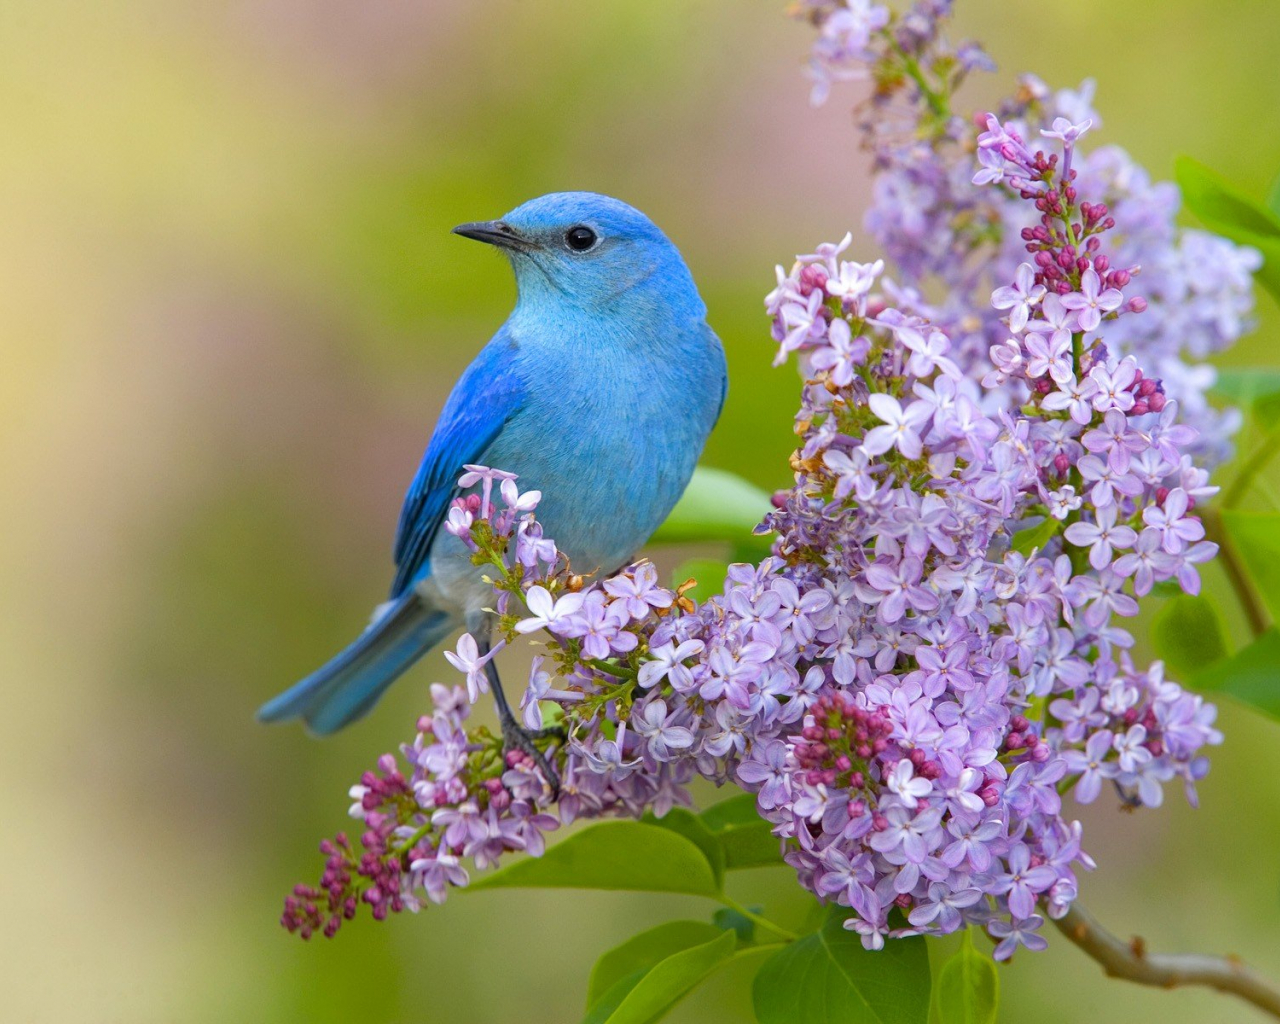 Free download Flowers birds lilac bluebirds wallpaper 1600x1200 328072 [1600x1200] for your Desktop, Mobile & Tablet. Explore Birds and Flowers Wallpaper. Bird Wallpaper for Walls, Wallpaper with Birds and